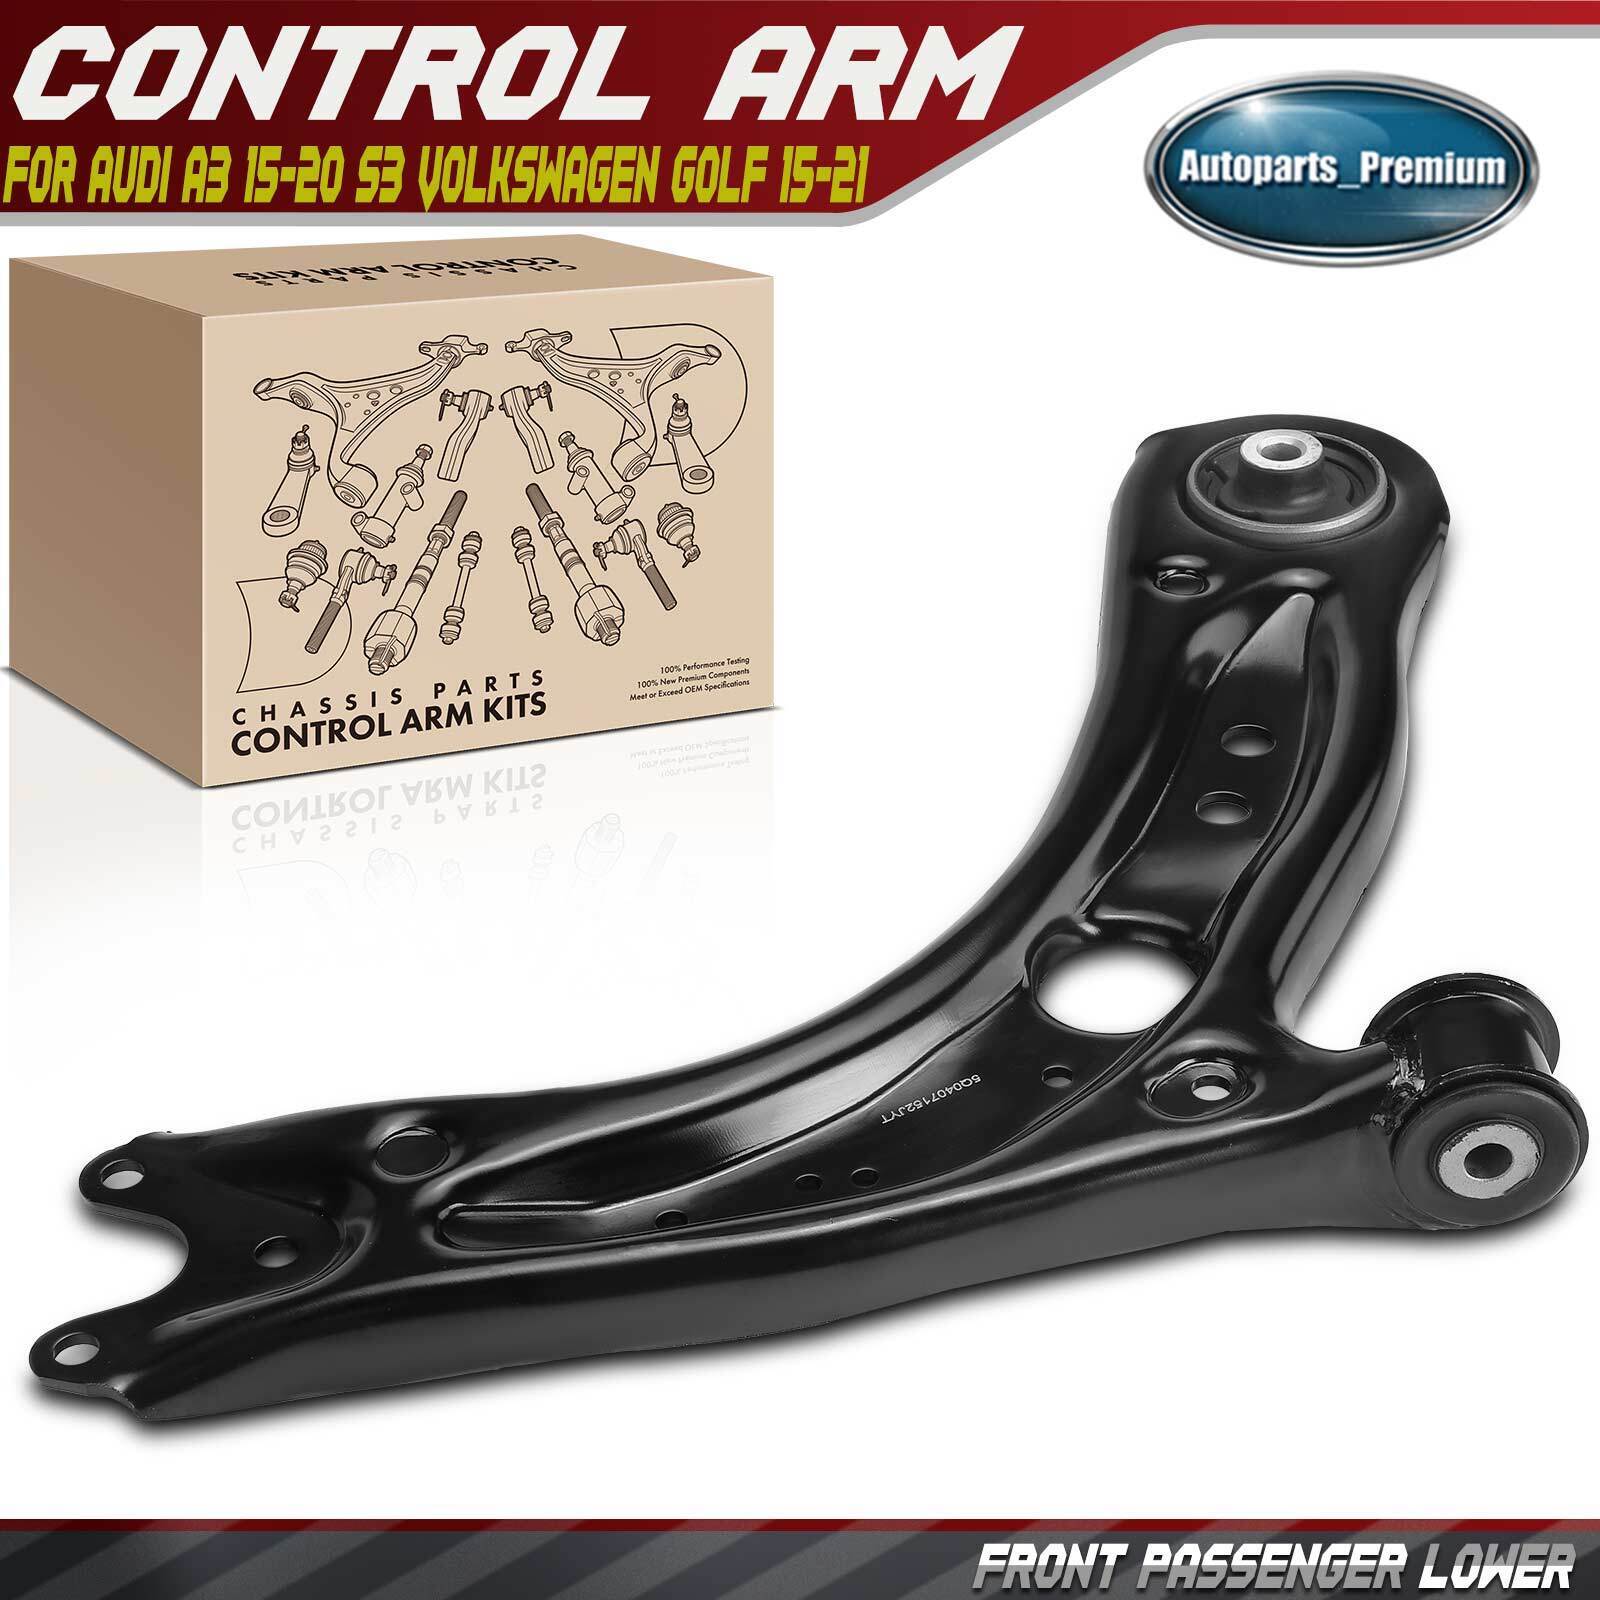 Front Right Lower Control Arm for Audi A3 15-20 S3 Volkswagen Golf 15-21 Jetta